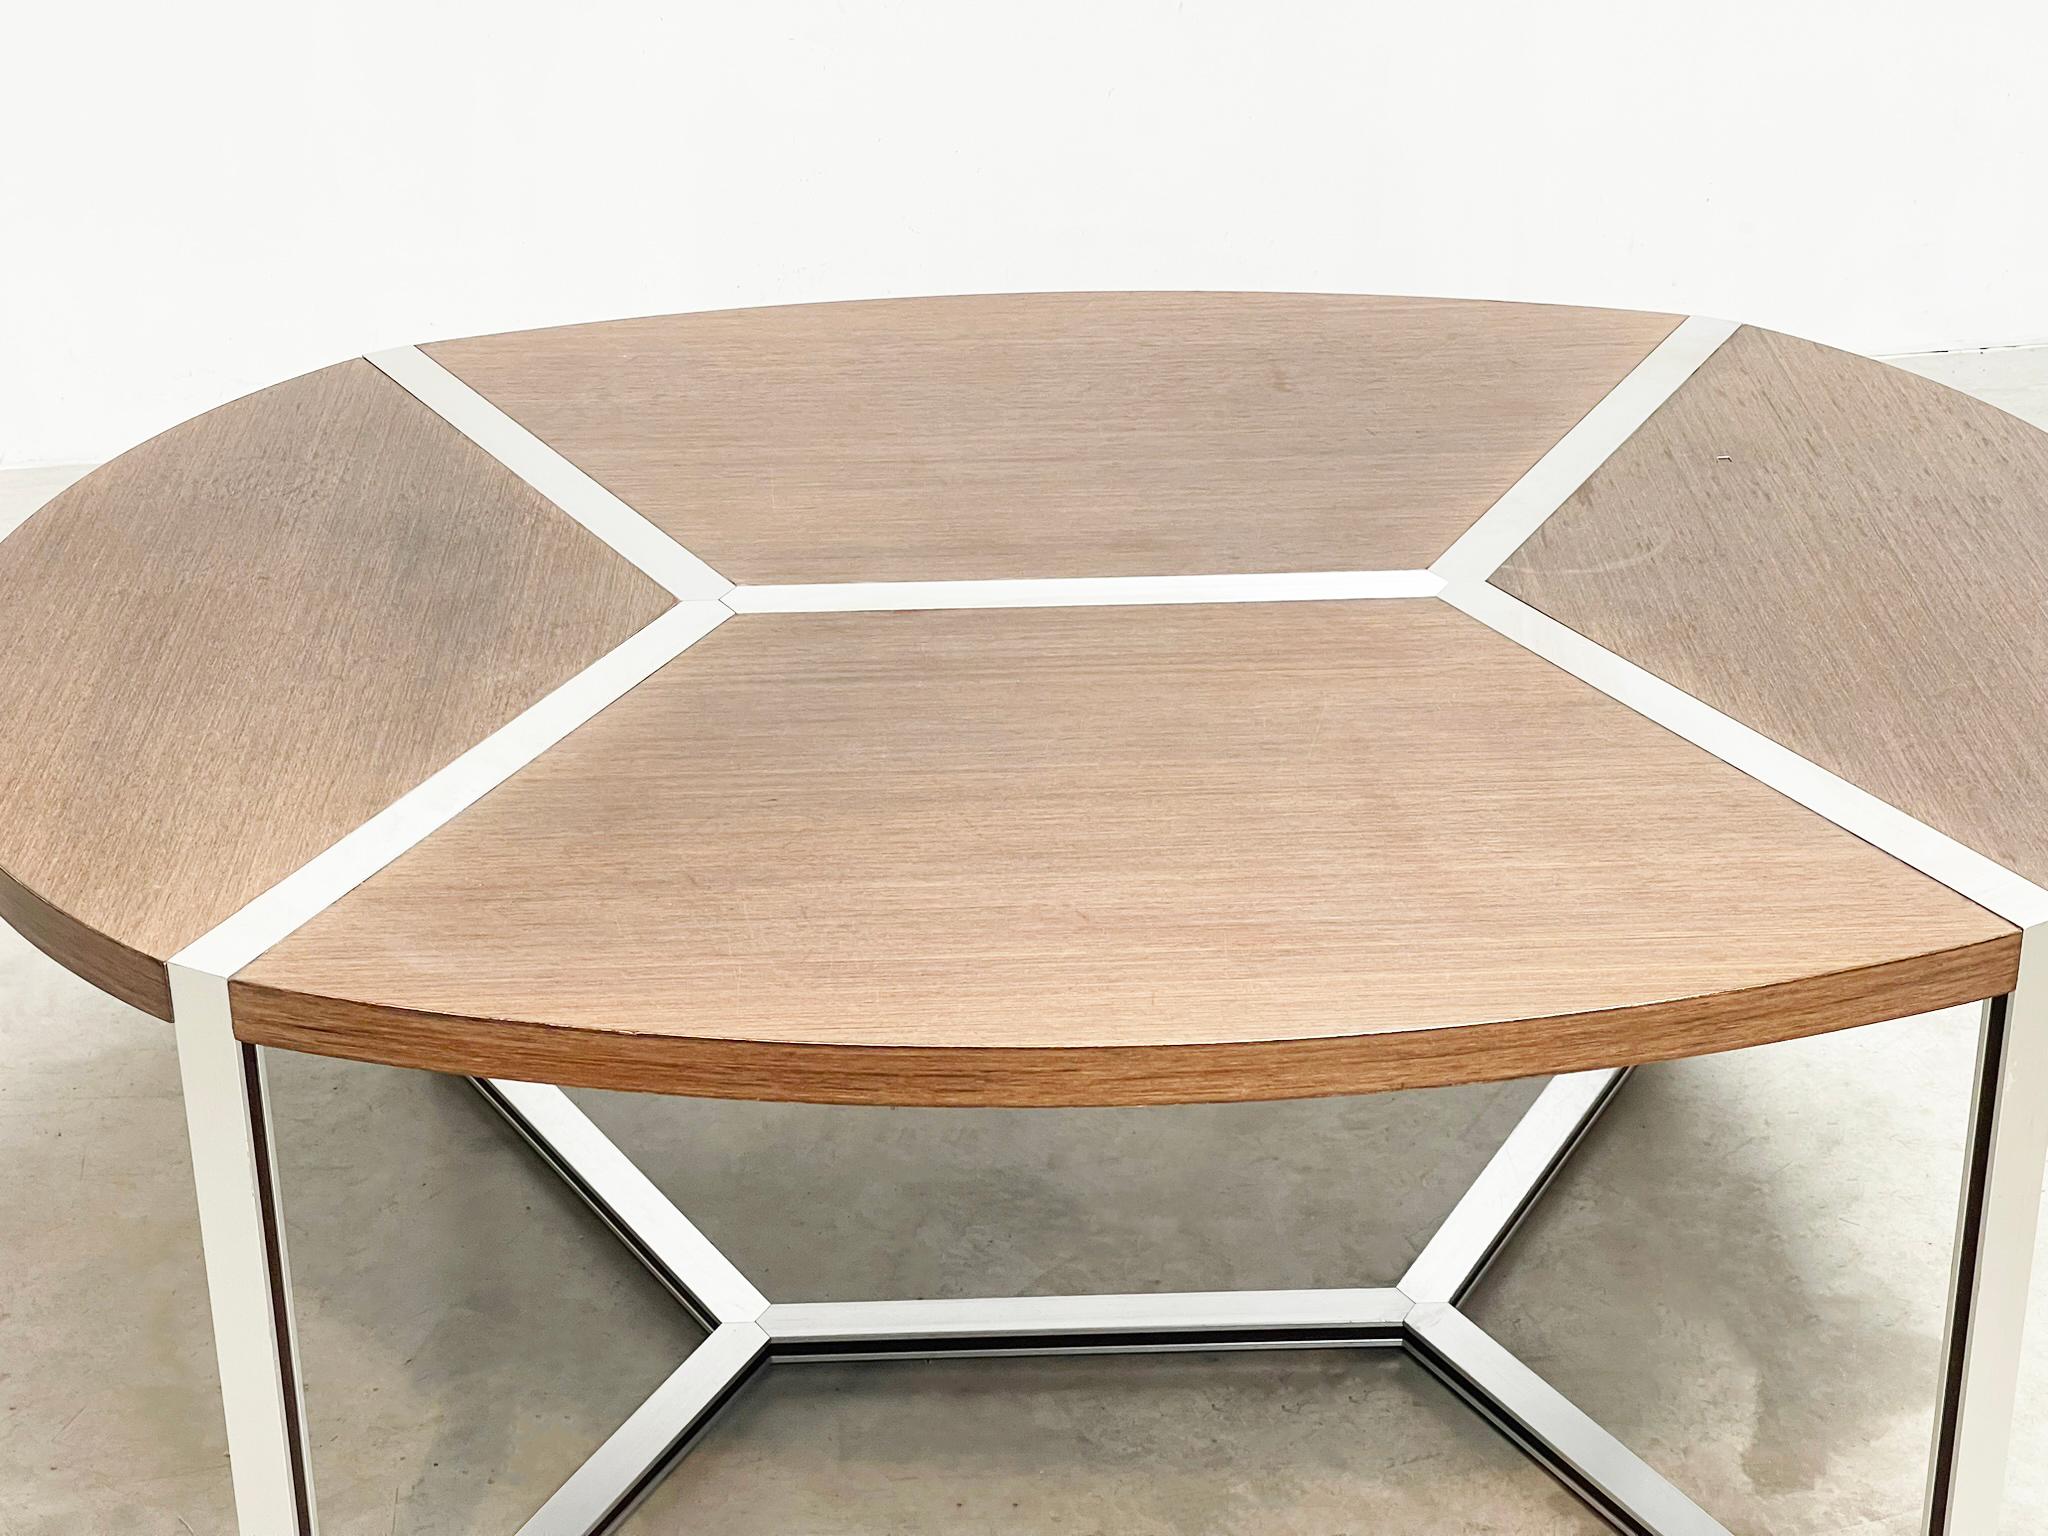 Geometrical Ligne Roset dining table designed by Henri Lesetre and Claude Gailla In Good Condition For Sale In Nijlen, VAN